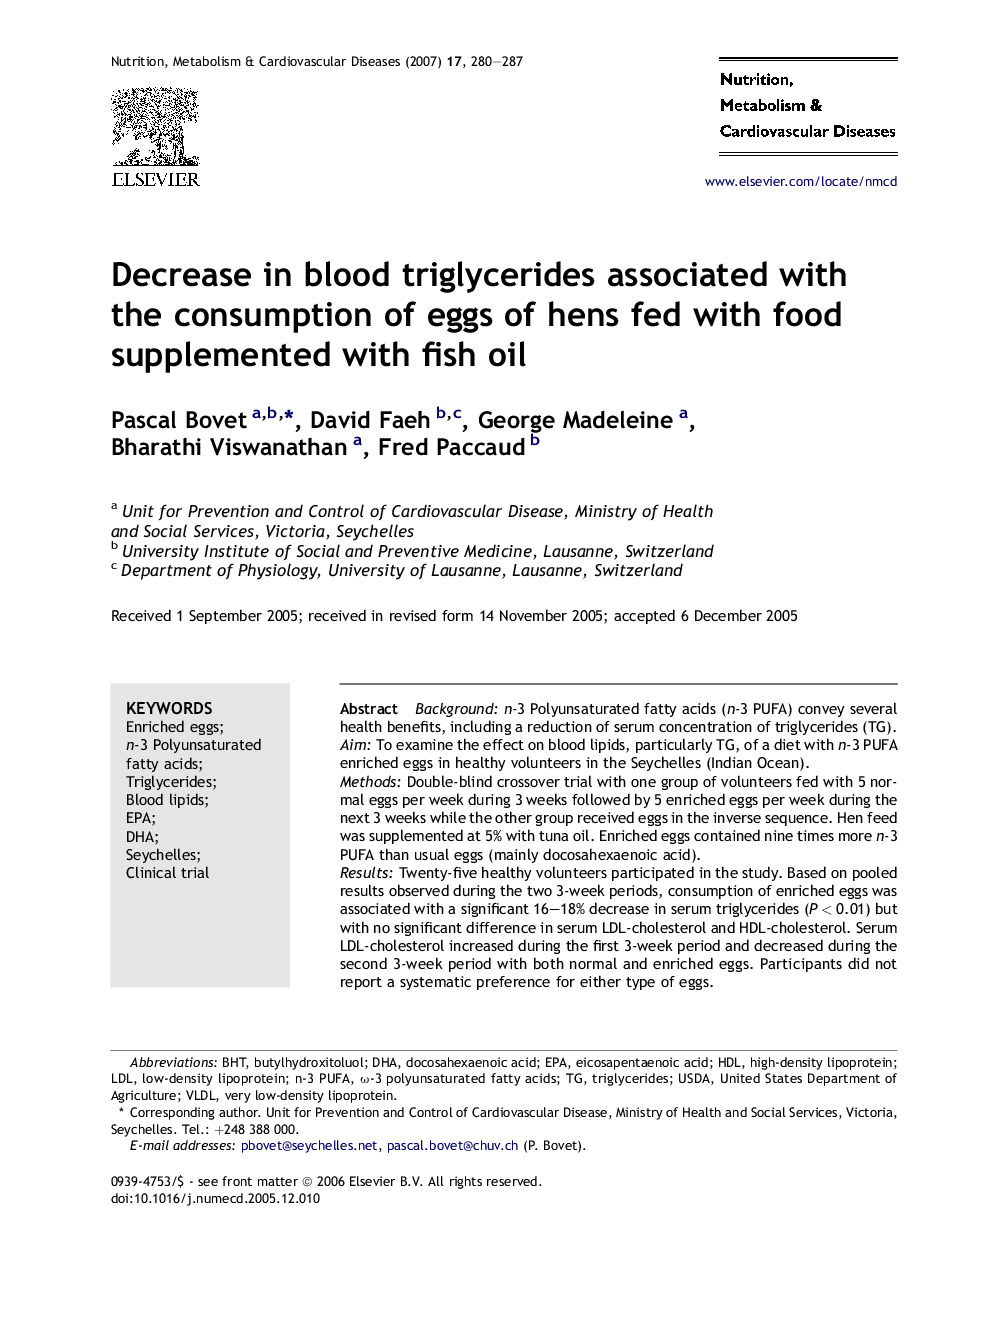 Decrease in blood triglycerides associated with the consumption of eggs of hens fed with food supplemented with fish oil